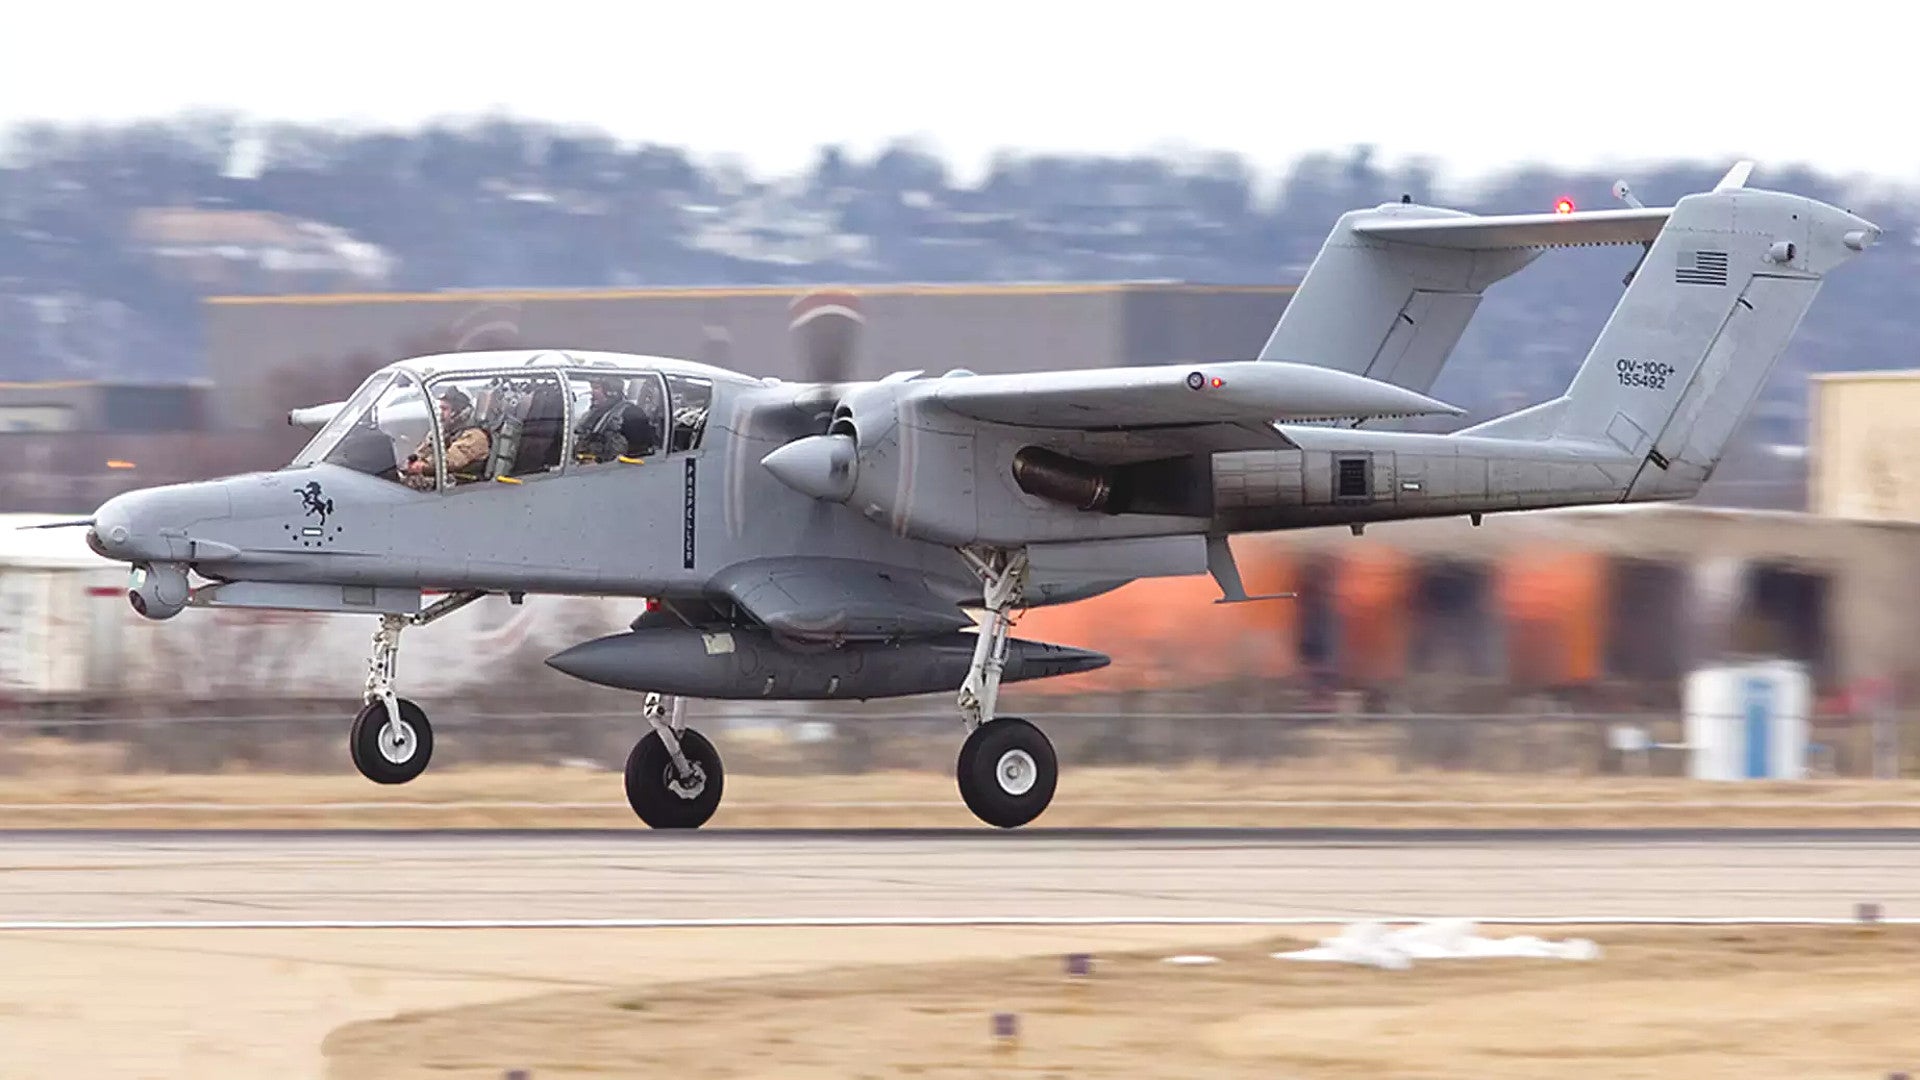 Those Suped-Up OV-10 Broncos That Took On ISIS In Iraq Are Being Sold Off